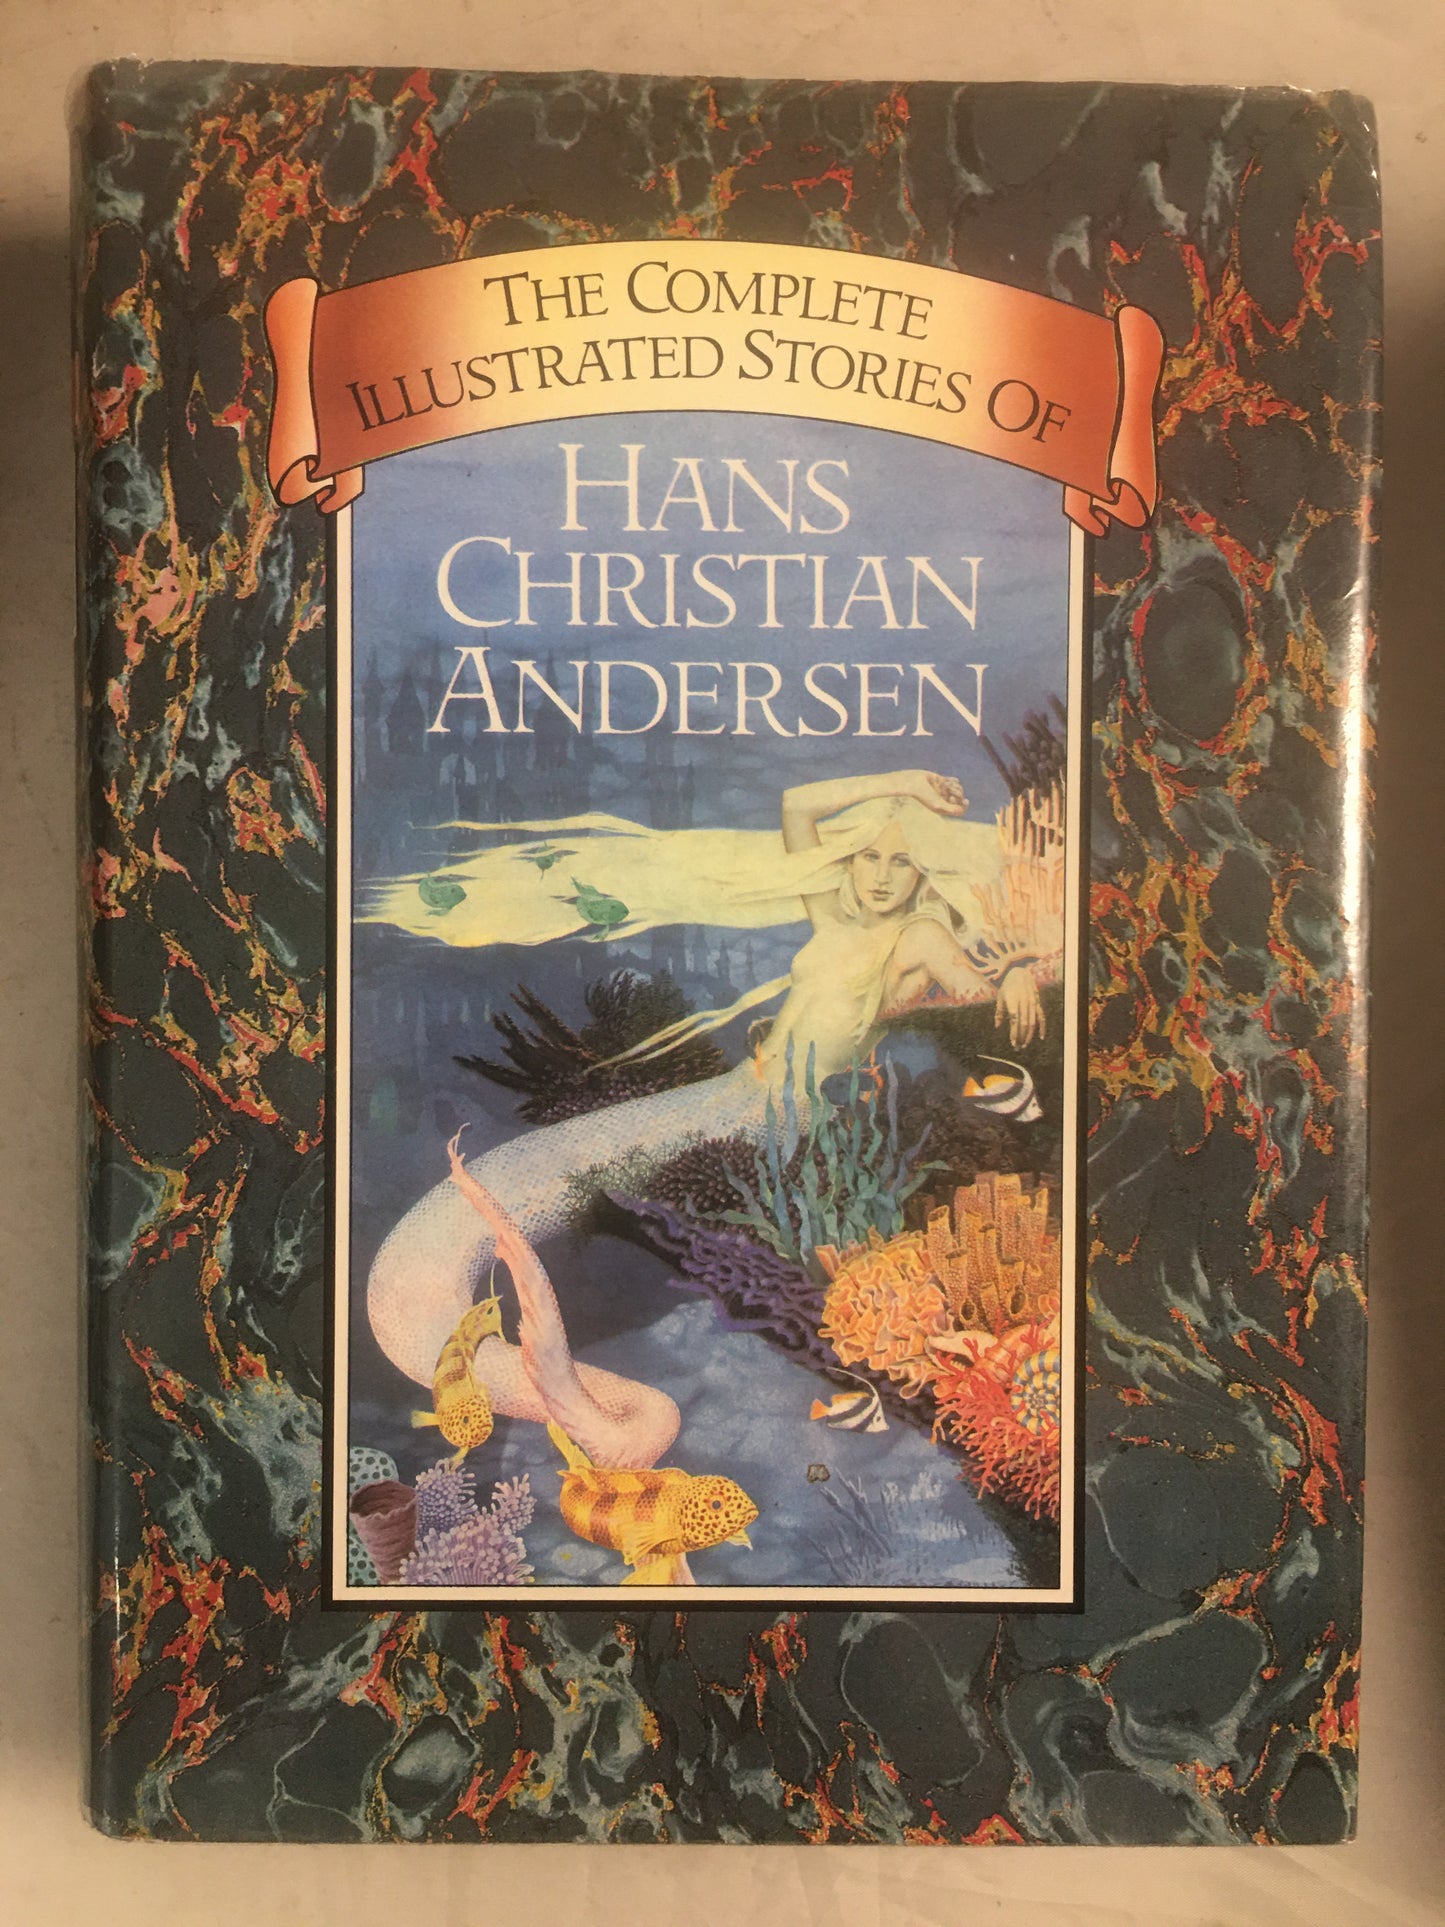 Complete Illustrated Stories of Hans Christian Andersen (Hardcover)